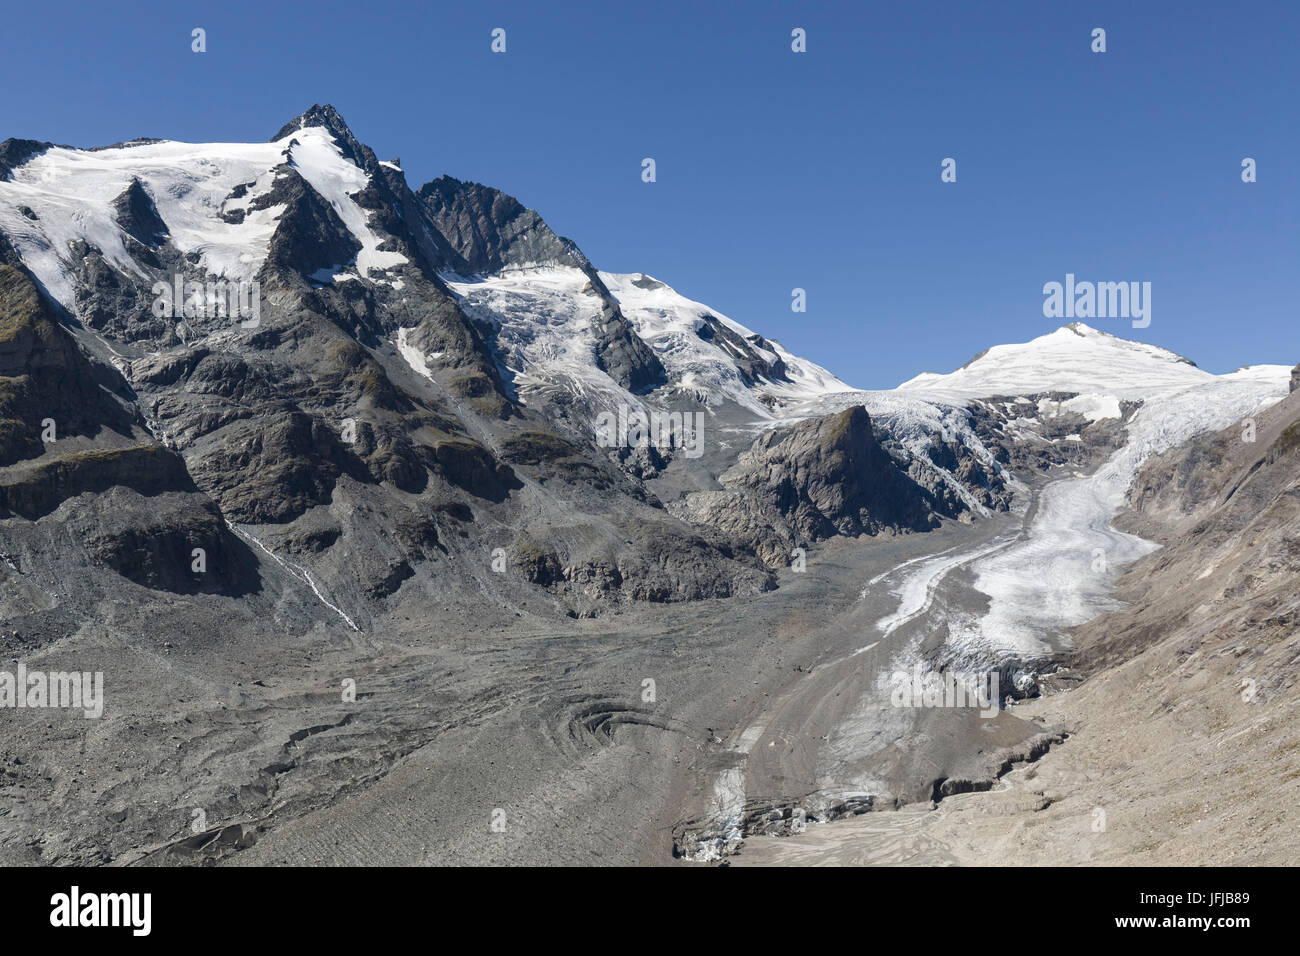 Europe, Austria, Grossglockner and Johannisberg mountains with the Pasterze glacier, Glockner Group, High Tauern Stock Photo